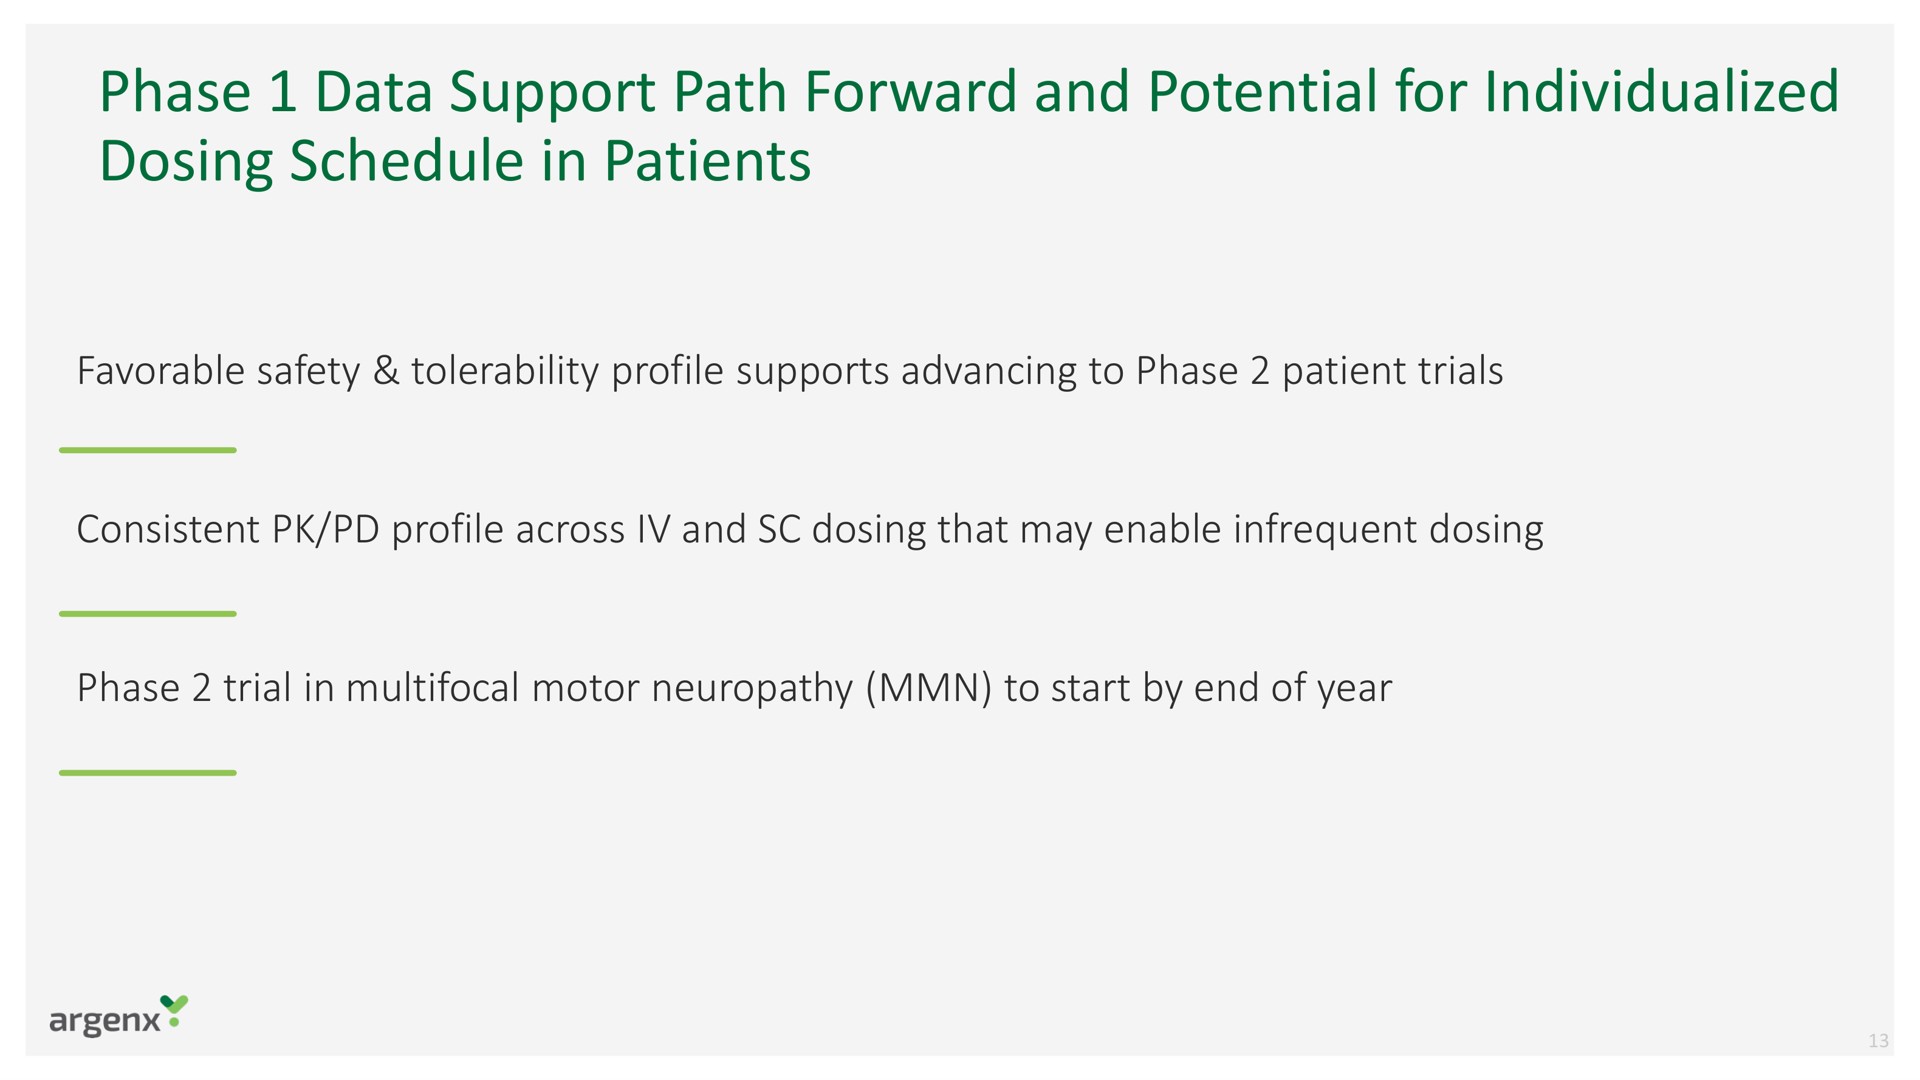 phase data support path forward and potential for individualized dosing schedule in patients | argenx SE